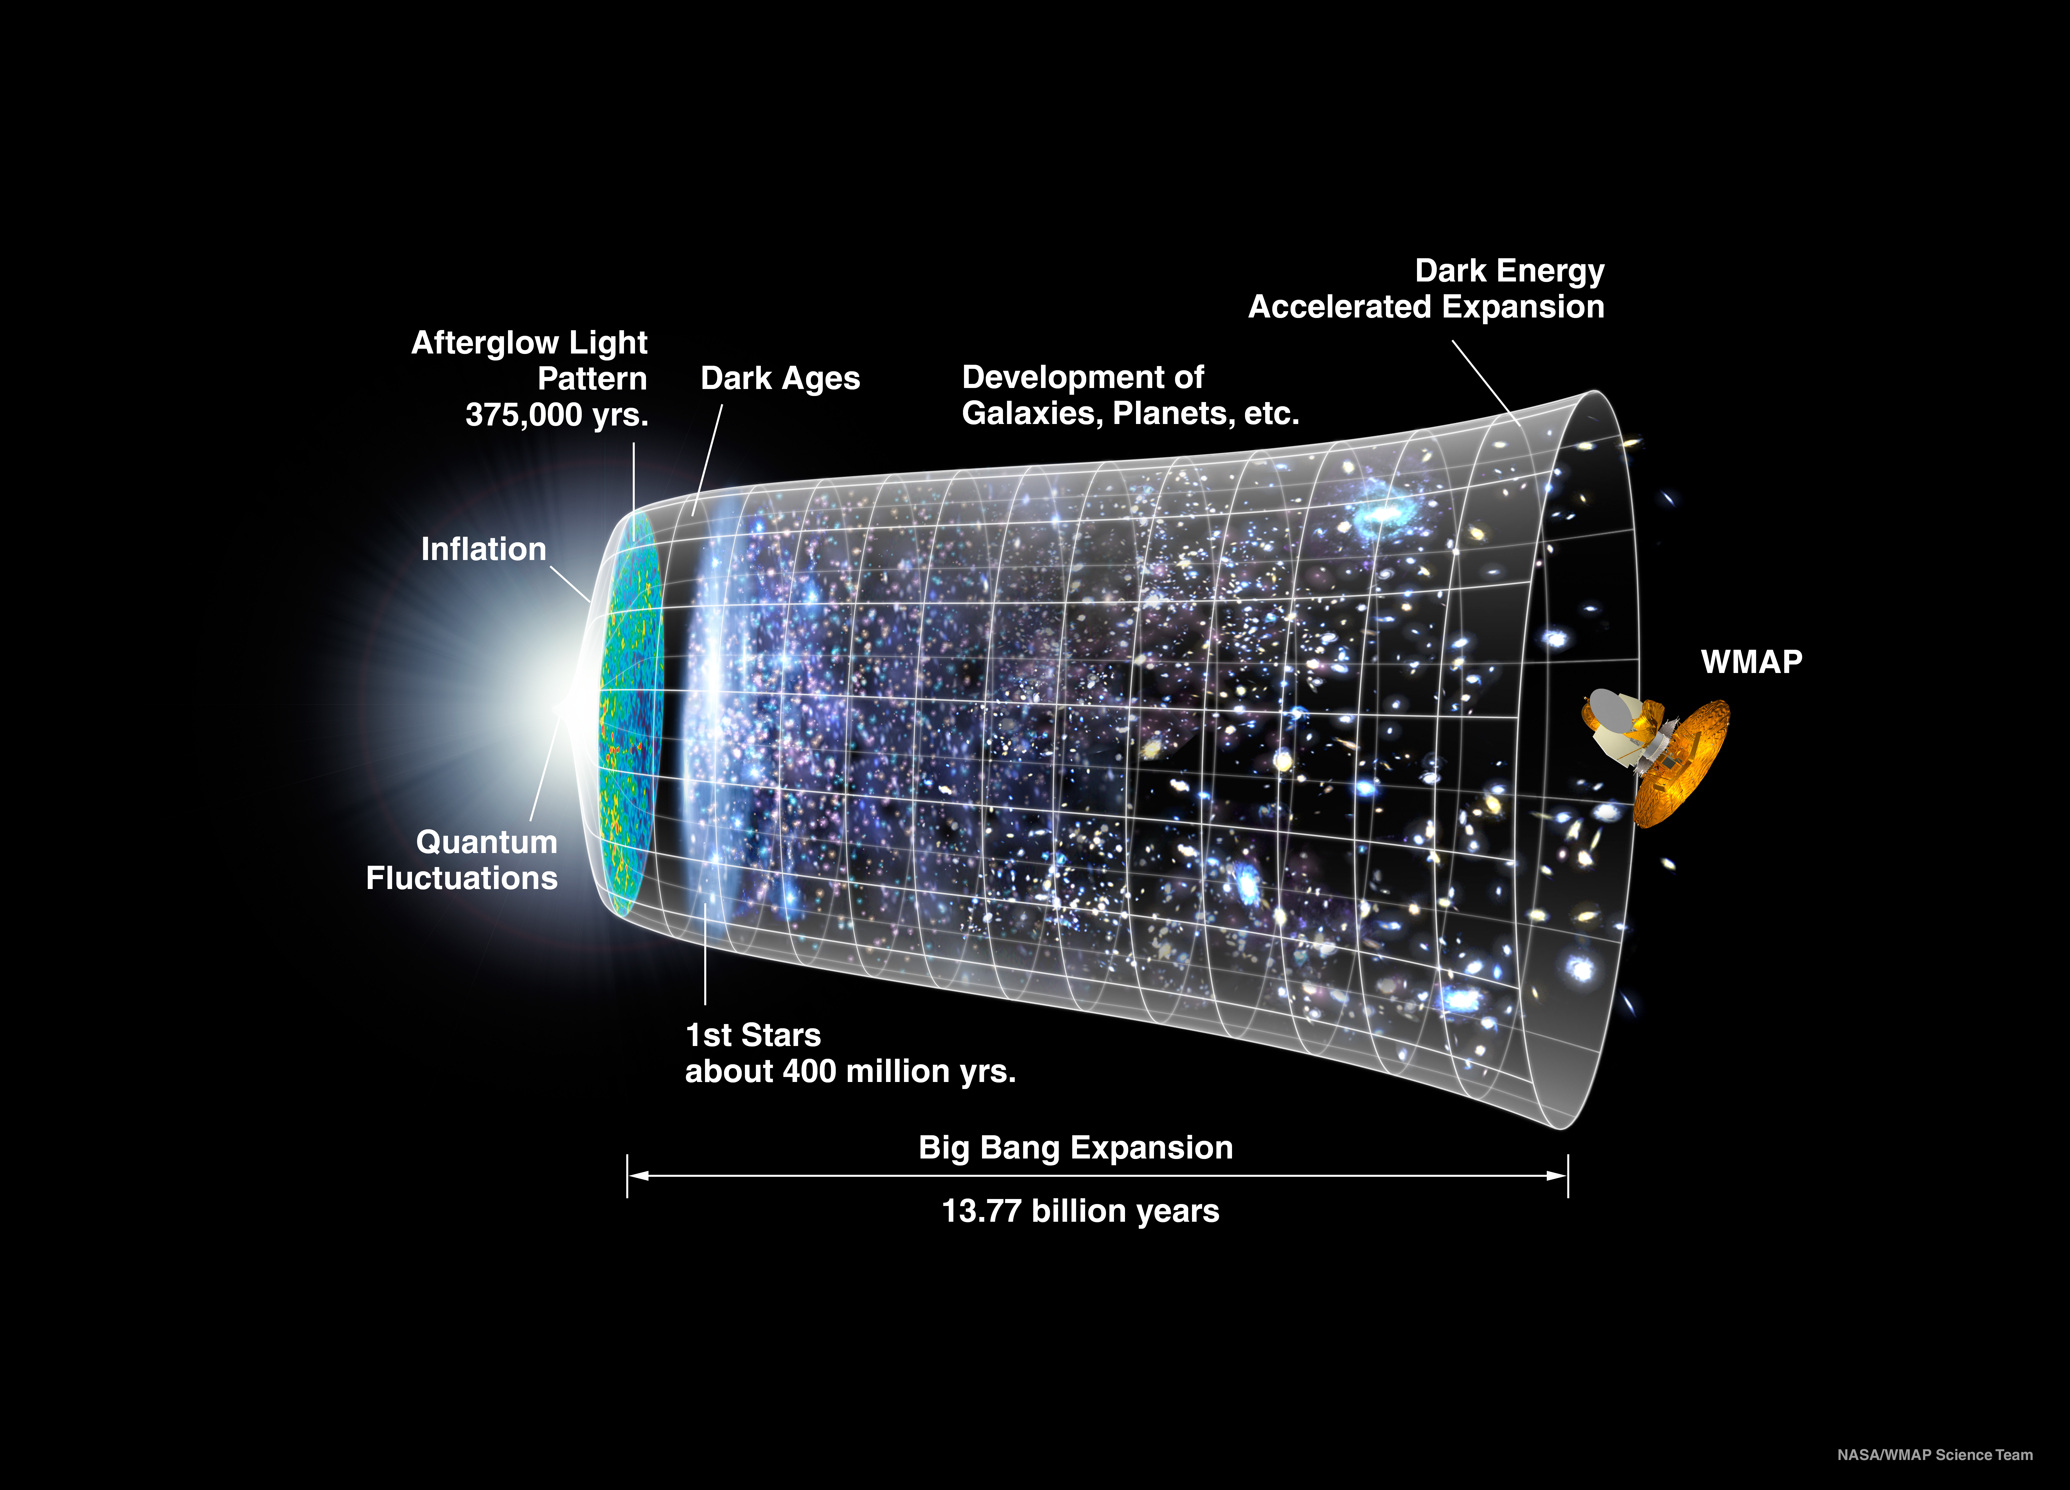 Illustration of the big bang expansion spanning 13.77 billion years starting from the quantum fluctuations, inflation, and afterglow light pattern 375,000 years, followed by the dark ages and the first stars about 400 million years ago. The remaining 10/13 are the development of galaxies, planets, etc. with the last 13th comprising a period of dark energy accelerated expansion and ending with WMAP.